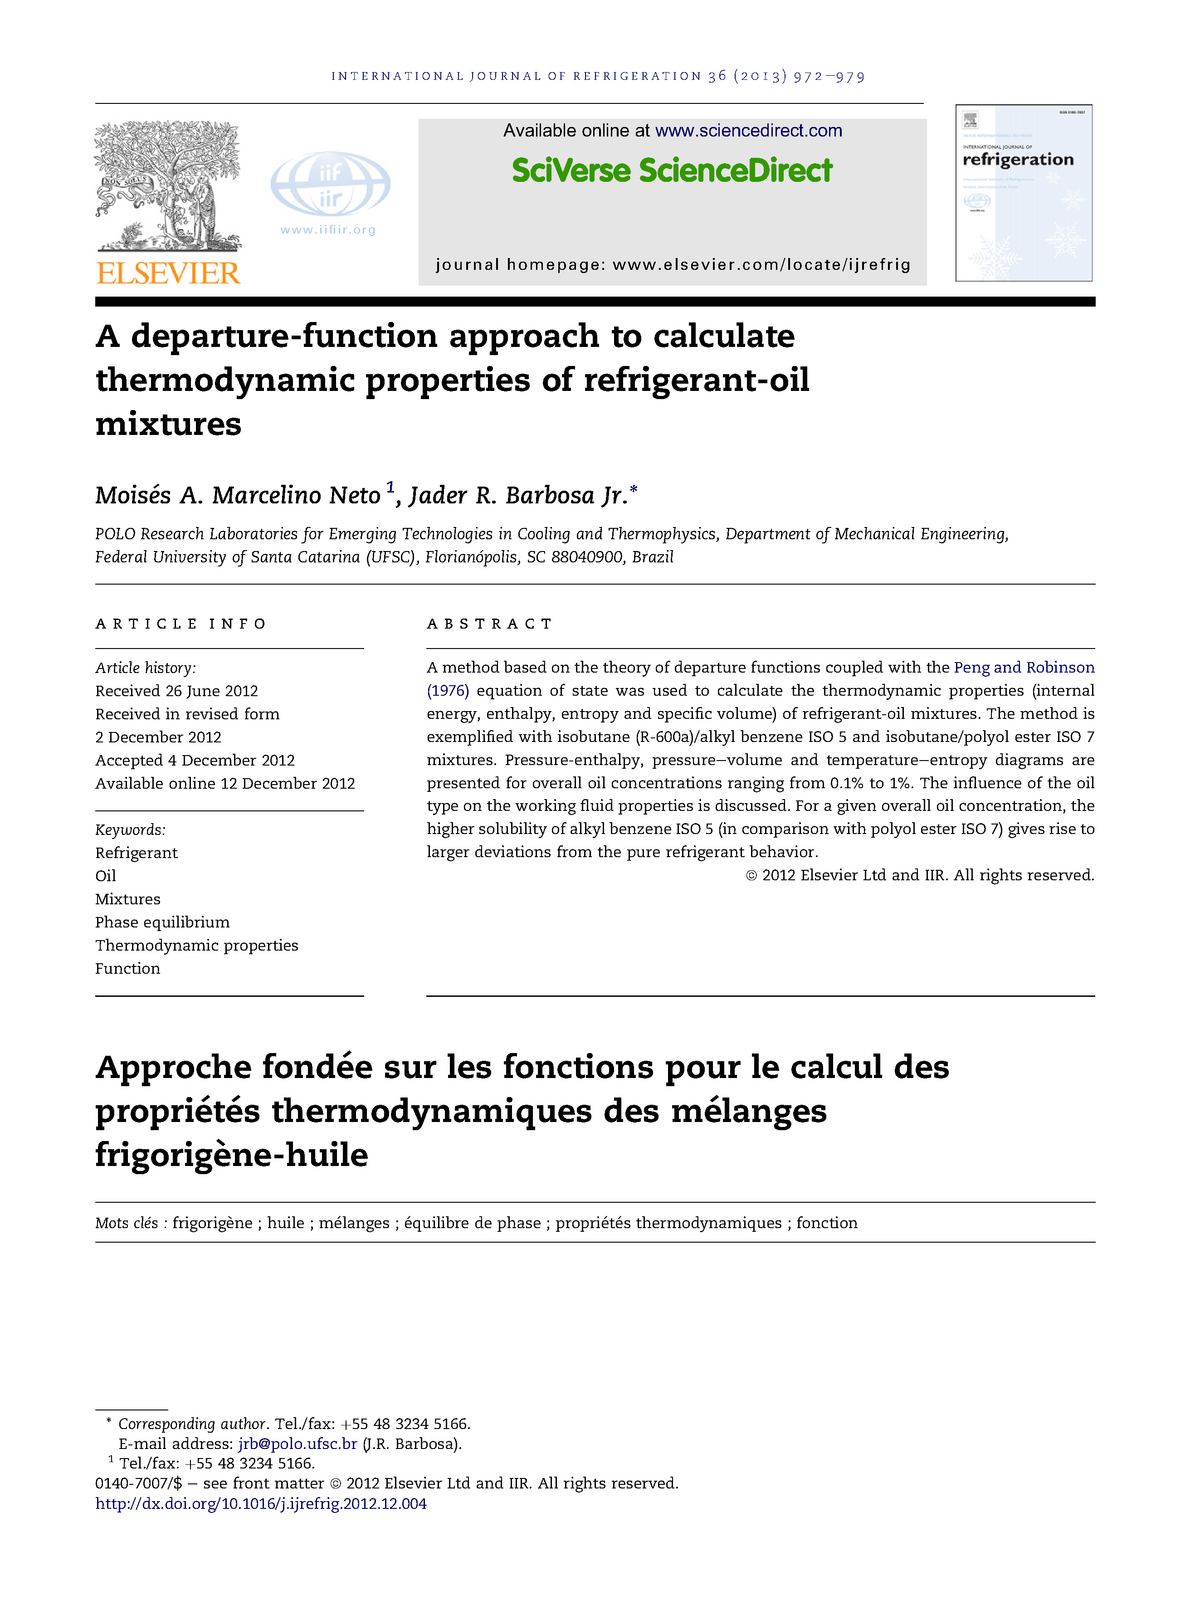 Article Main A Departure Function Approach To Calculate Thermodynamic Properties Of Refrigerant Oil Mixtures Studocu